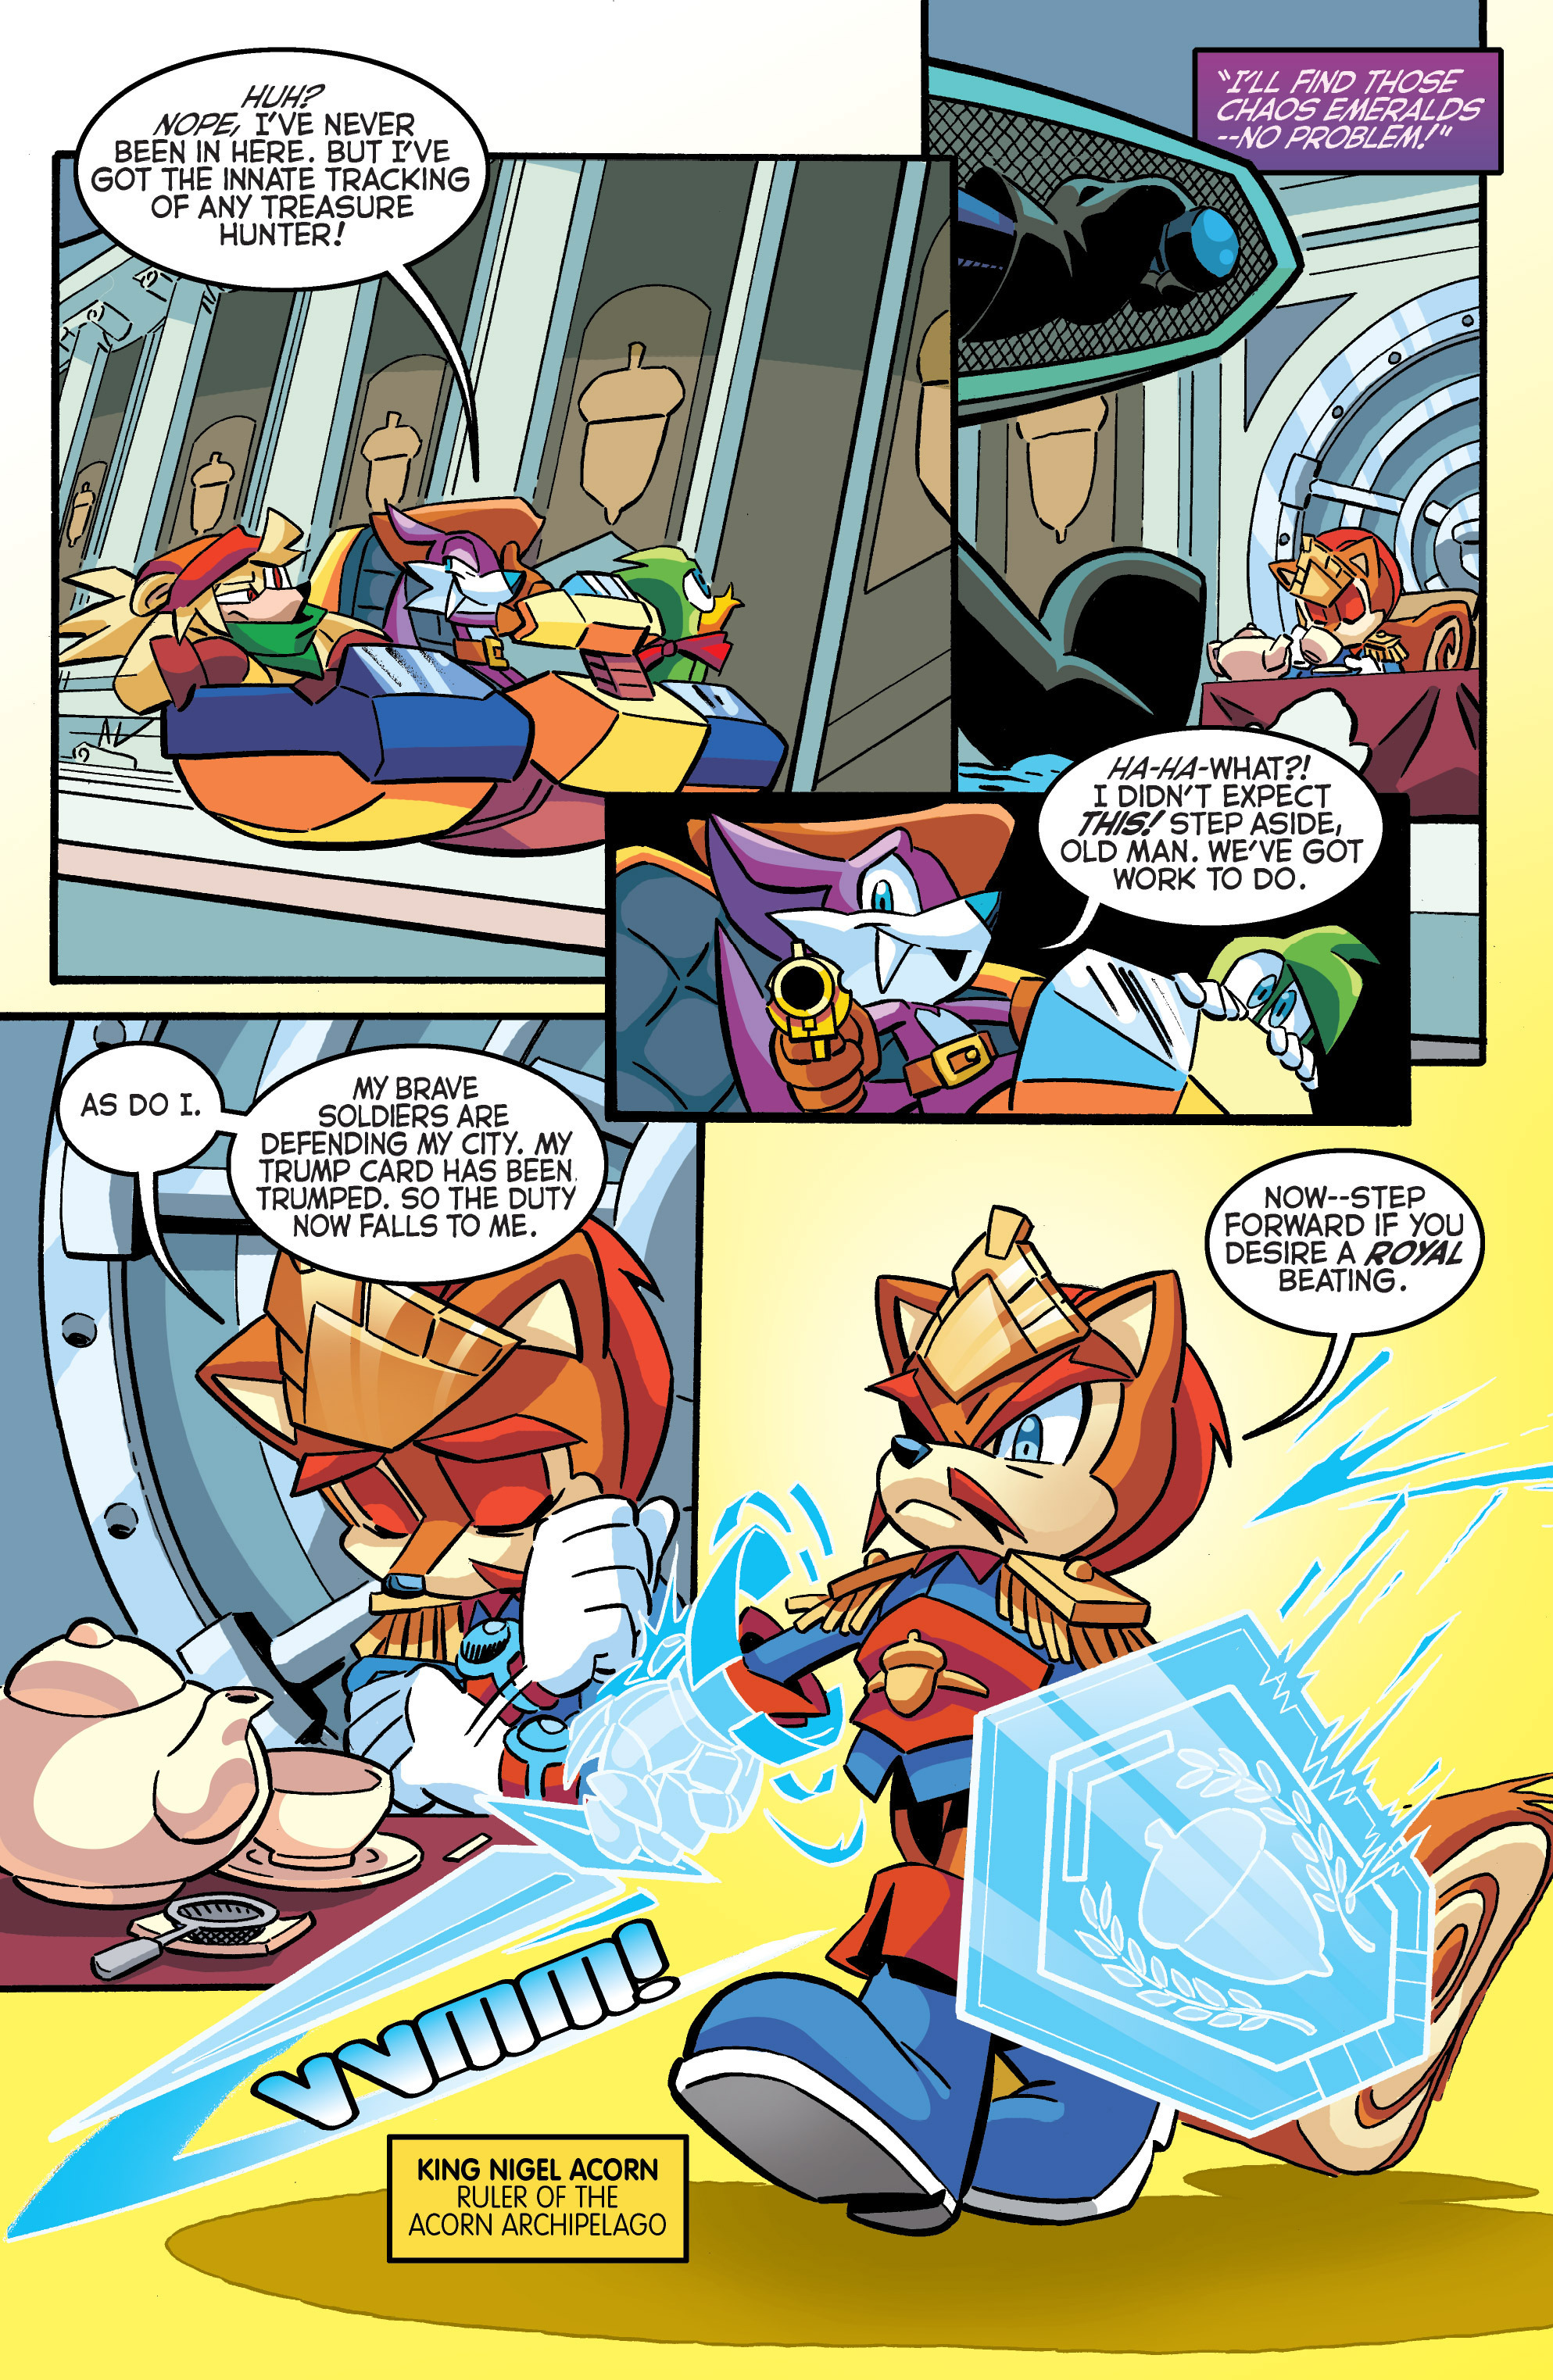 STH #284 - Preview Page 3, Archie Sonic Comics